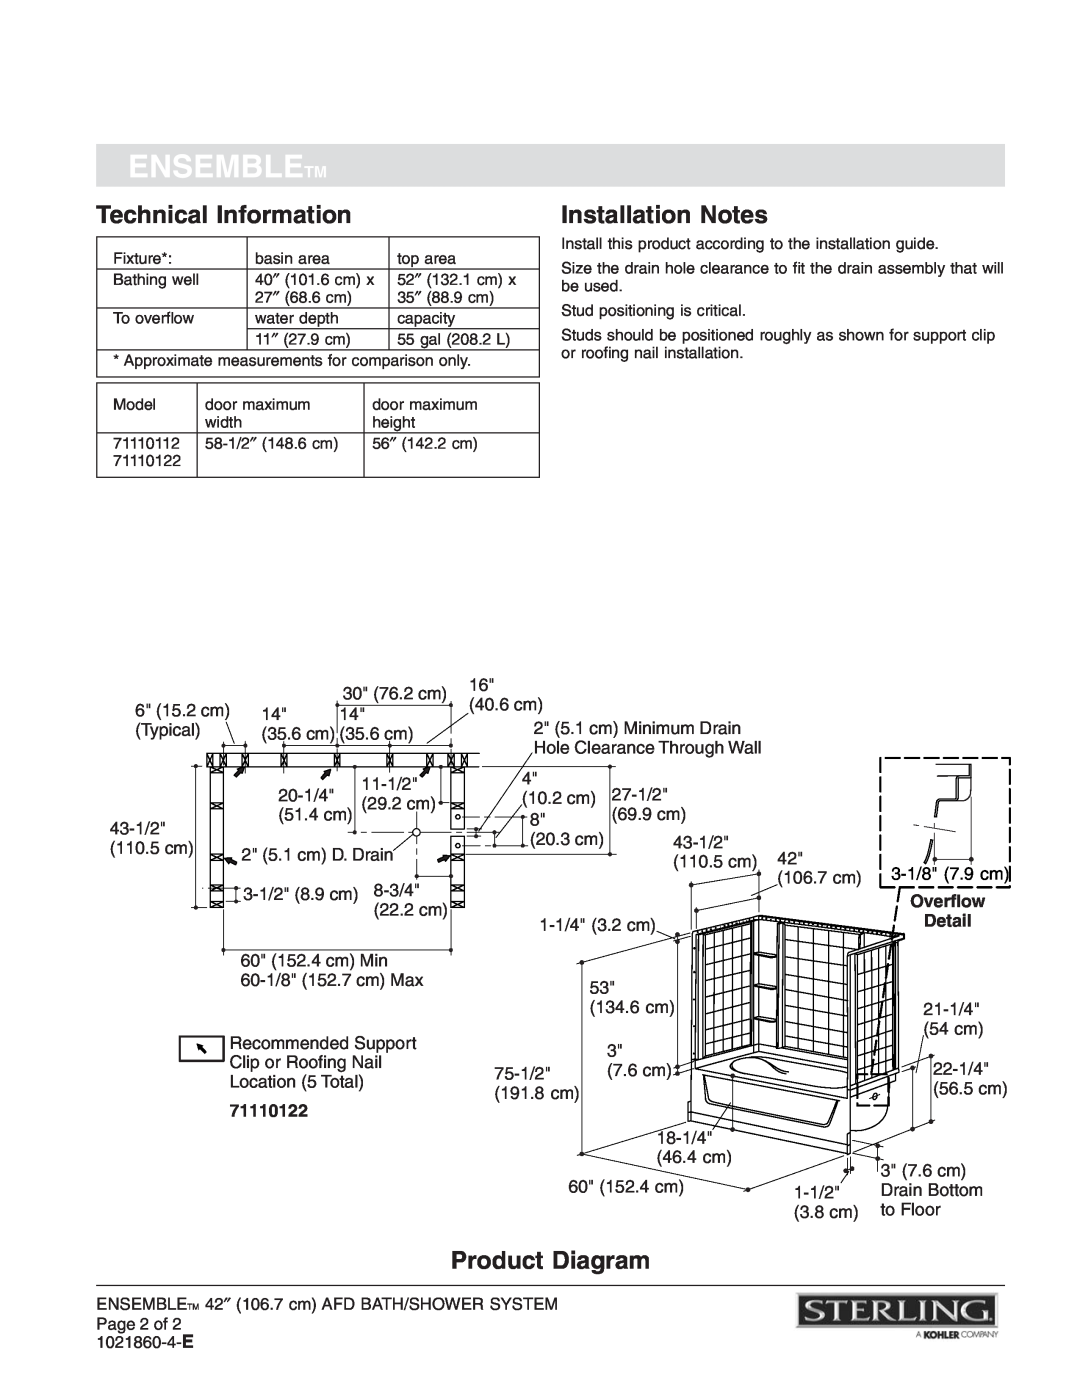 Sterling Plumbing 71110112 dimensions Technical Information, Installation Notes, Product Diagram, Ensembletm, 71110122 